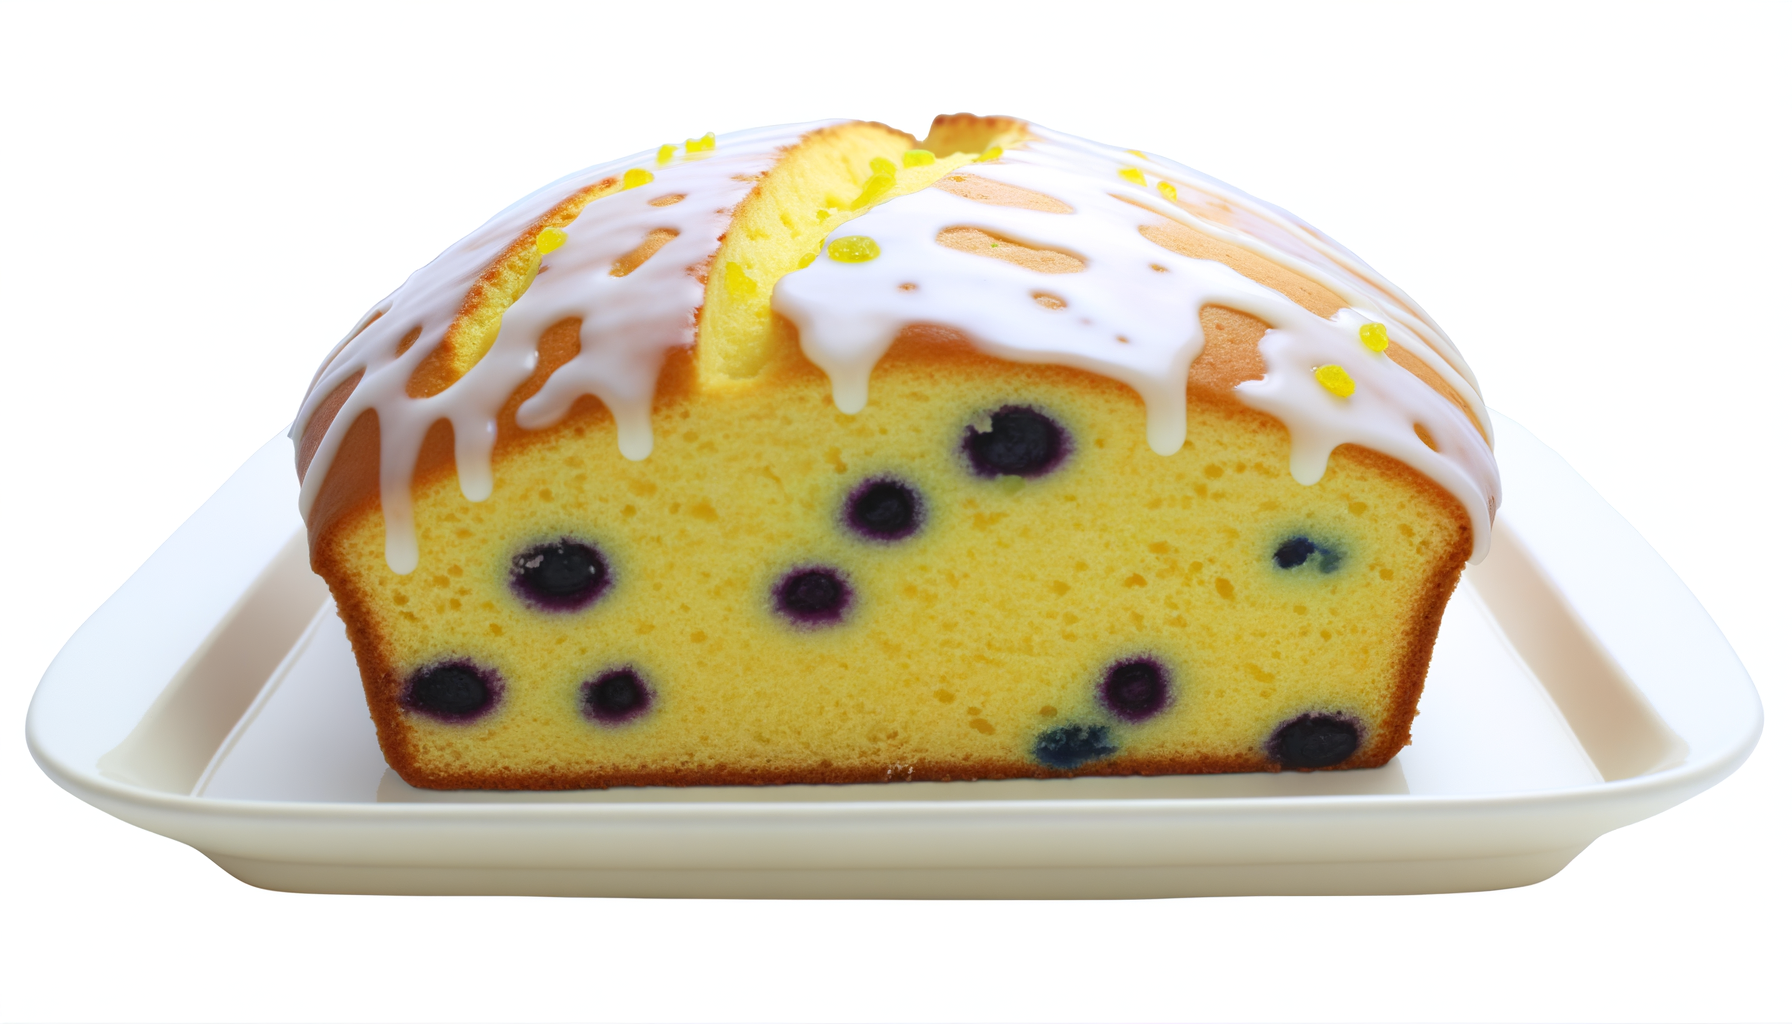 Bright lemon blueberry bread with a glossy glaze, bursting with berries and lemon zest, presented on white ceramic.